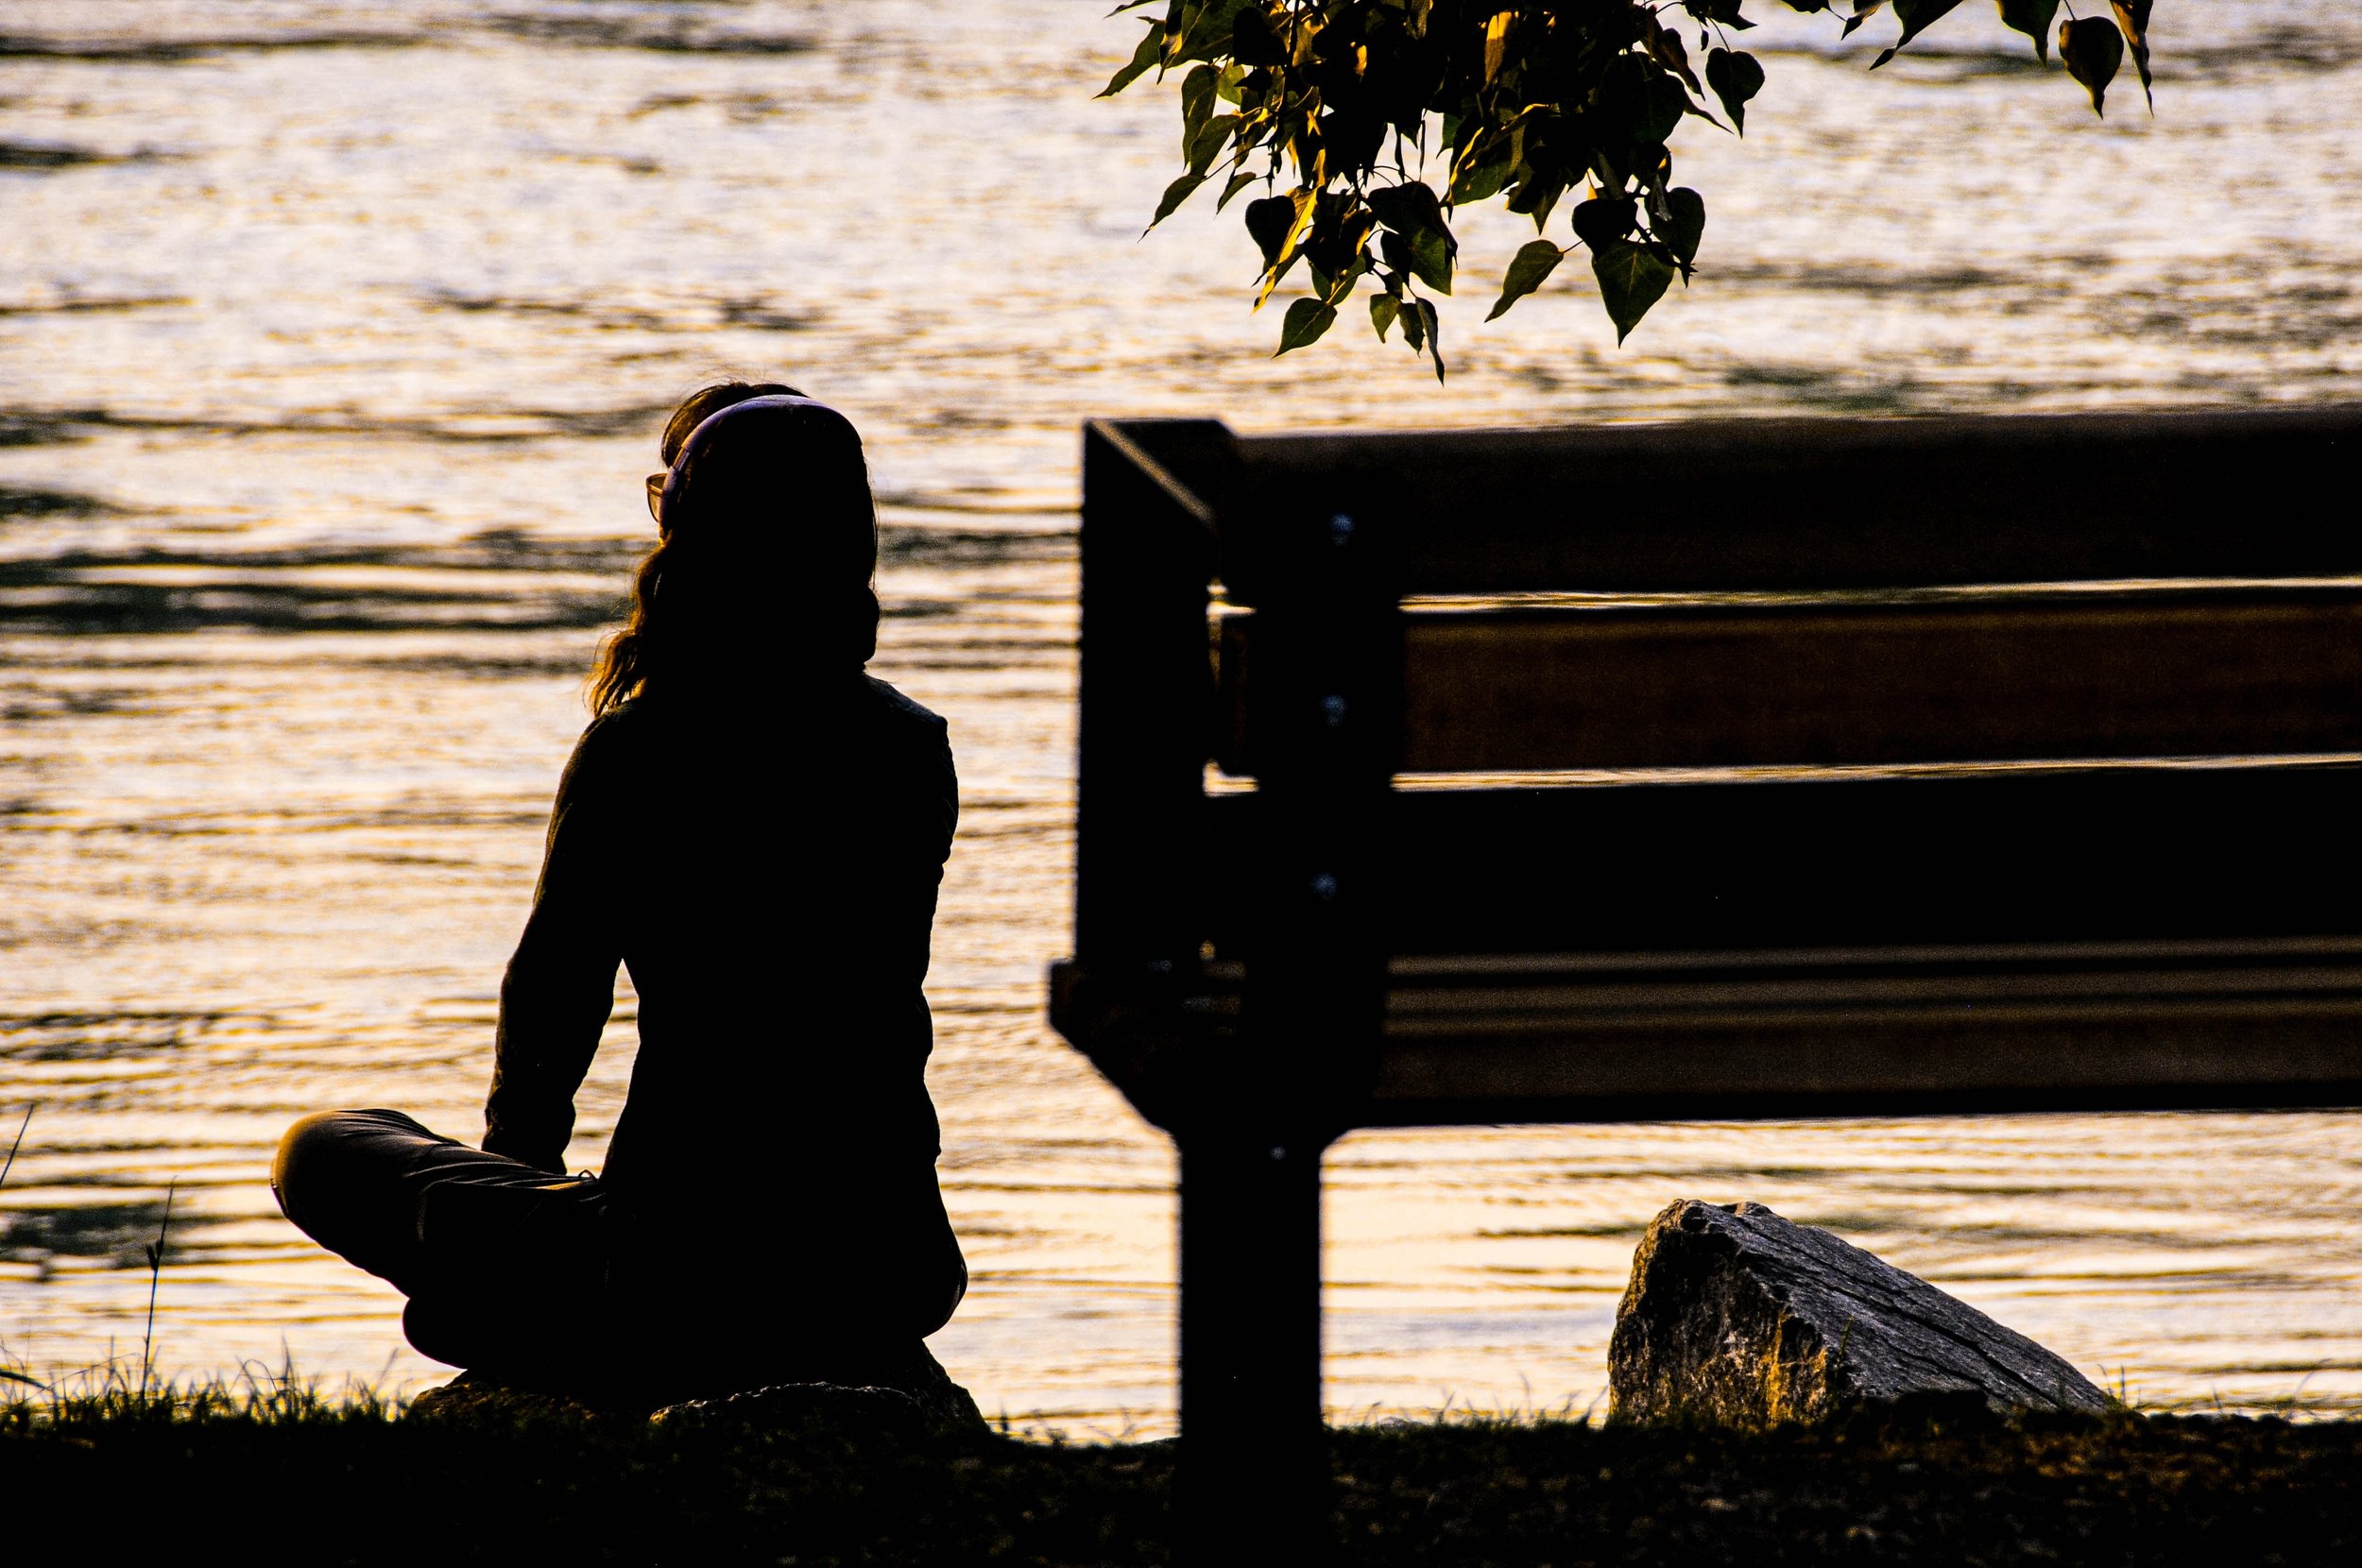 a woman sitting on a rock overlooking a wavy lake at sunset. there is a bench behind and to the right of her, and a leaves from a tree hanging over the bench.